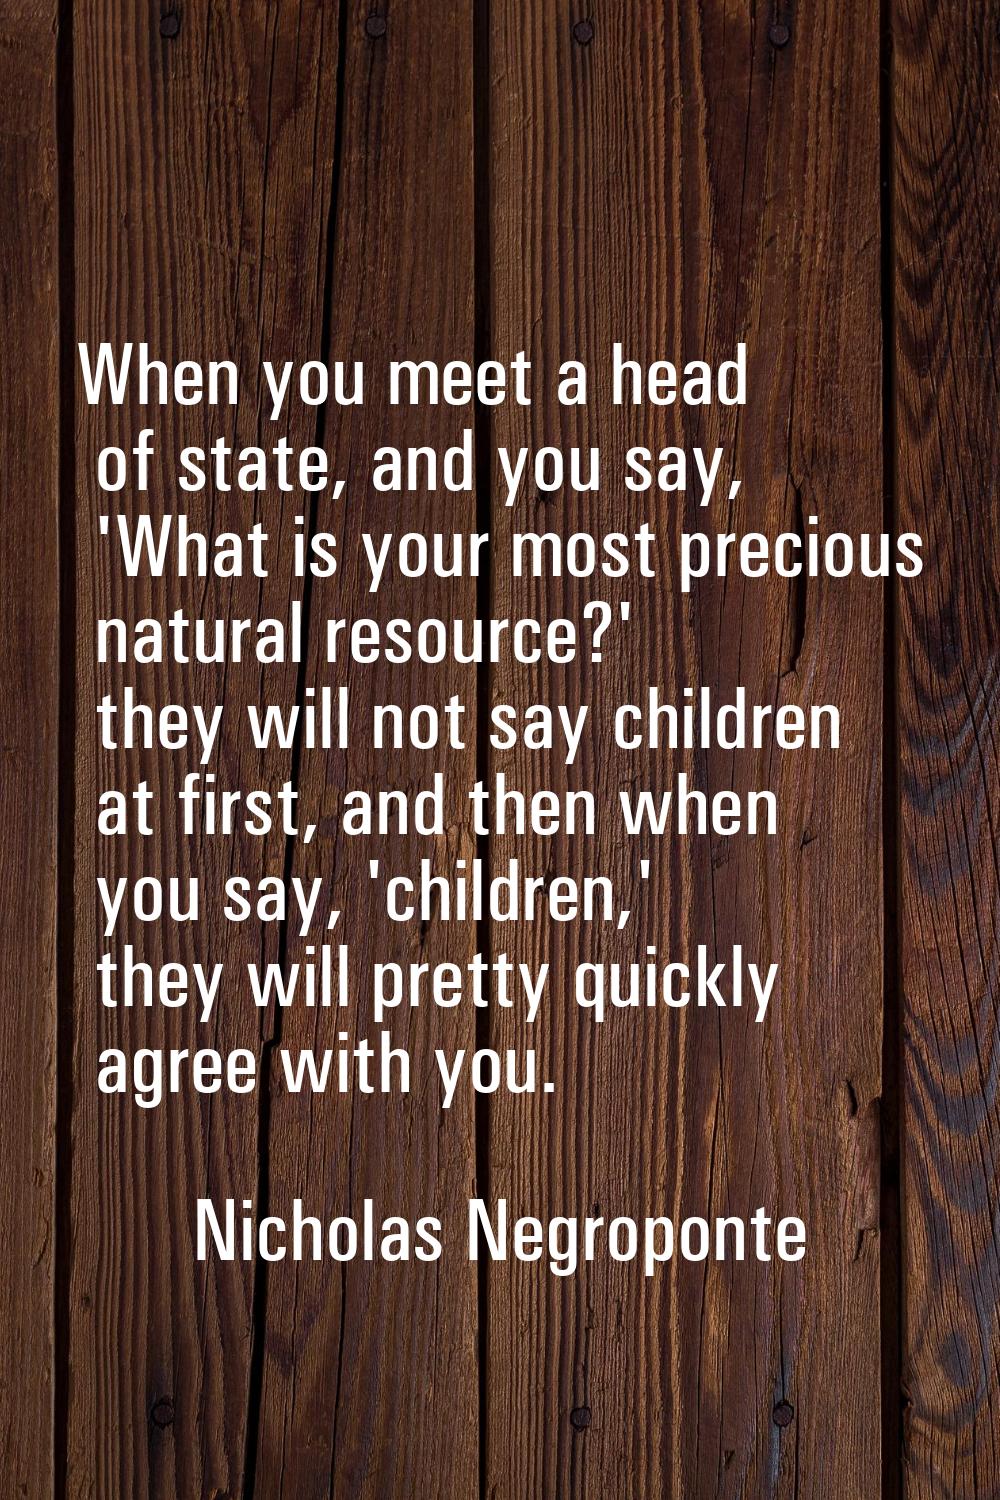 When you meet a head of state, and you say, 'What is your most precious natural resource?' they wil